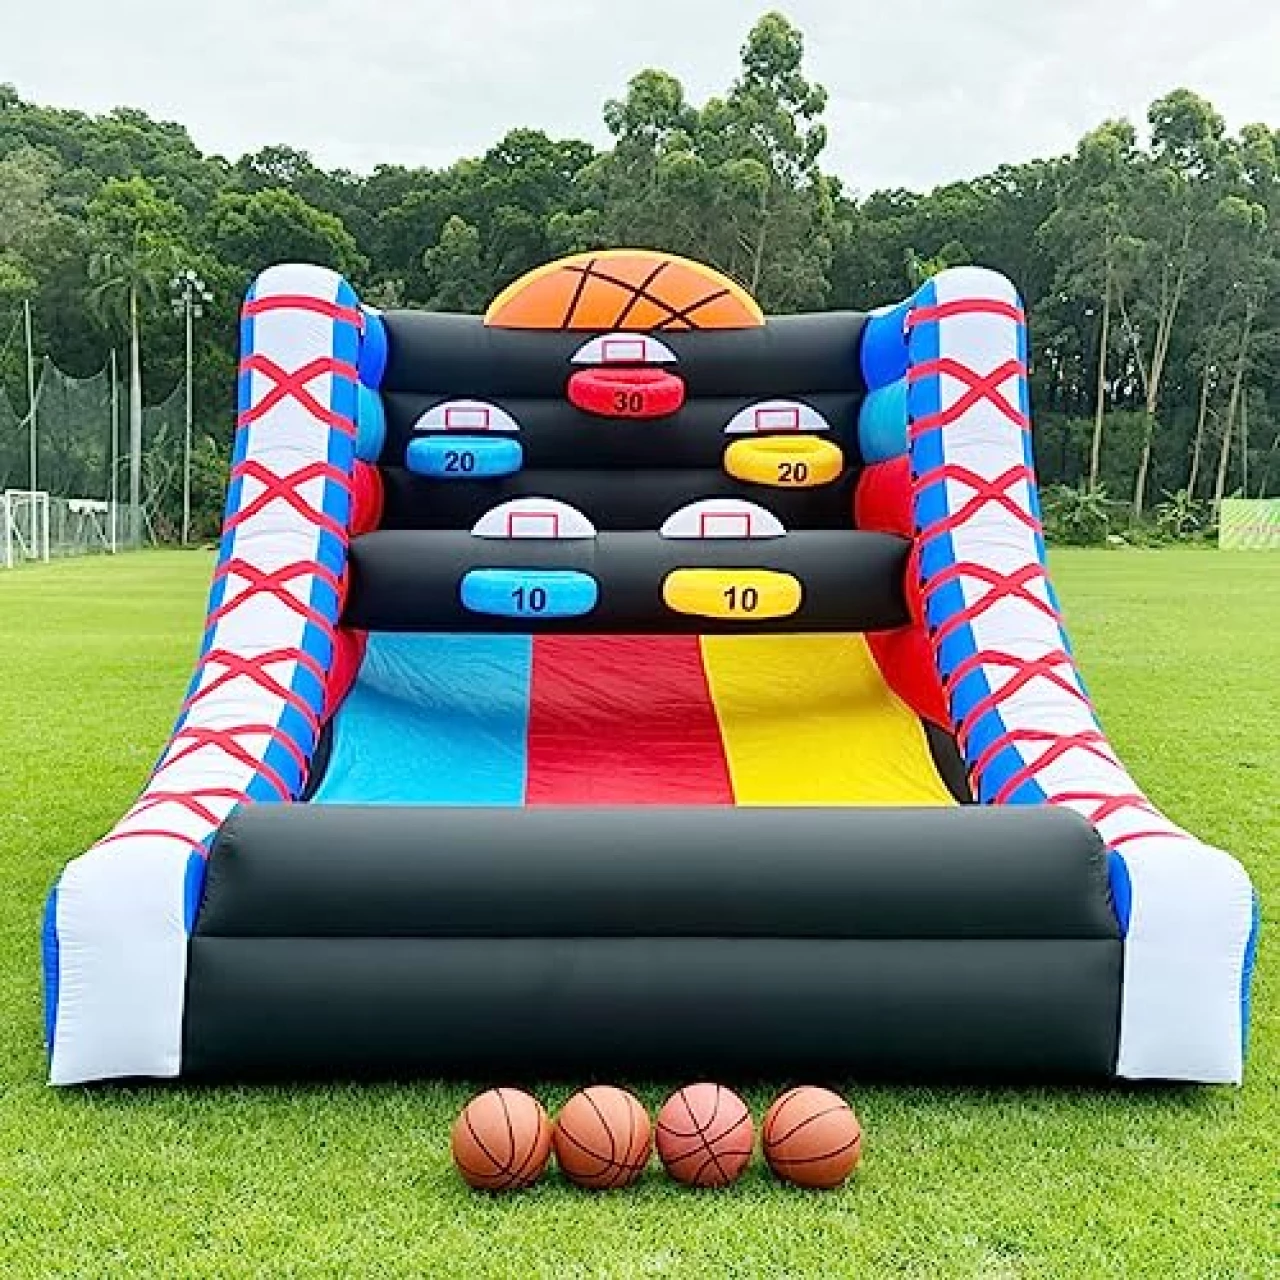 Inflatable Basketball Hoop Shot Inflatable Party Basketball Interactive Game with 5 Hoops, 4 Balls, Commercial Blower